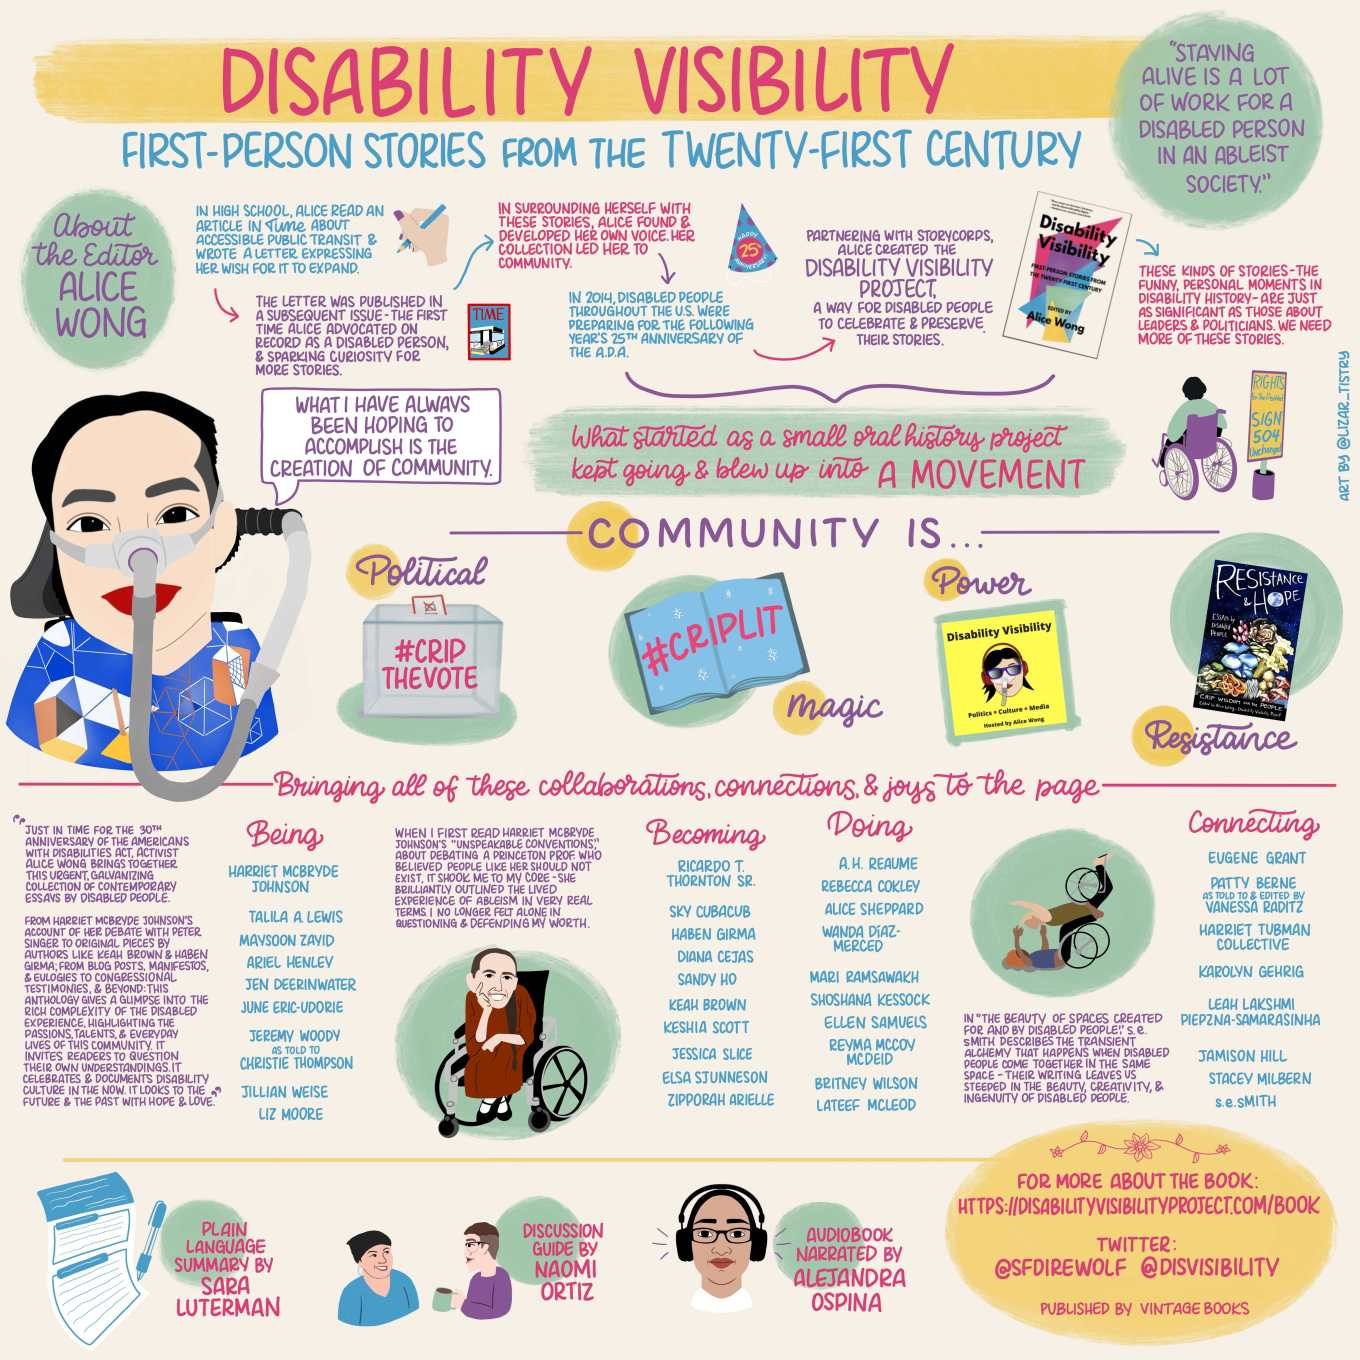 Infographic titled “Disability Visibility: First-Person Stories from the Twenty-First Century” with a yellow, pink, turquoise, pastel green, and pastel purple color scheme. A green circle next to the title reads “Staying alive is a lot of work for a disabled person in an ableist society.” Another green circle reads “About the editor - Alice Wong” is above a doodle of Alice Wong, an Asian American women in a power chair and a blue shirt with an organize, black, white and yellow geometric pattern, wearing a mask over her nose attached to a gray tube and bright red lip color; and a speech bubble reads “What I have always been opening to accomplish is the creation of community.” Text reads “In high school, Alice read an article in Time about accessible public transit and wrote a letter expressing her wish for it to expand” with a doodle of a hand with a blue pencil and purple nails.” An arrow points to text reading “The letter was published in a subsequent issue - the first time Alice advocated on record as a disabled person, and sparking curiosity for more stories” with a doodle of a Time Magazine cover with a bus with a wheelchair ramp. Another arrow points to text reading “In surrounding herself with these stories, Alice found and developed her own voice. Her collection led her to community” and another arrow points to text reading “In 2014, disabled people through the U.S. were preparing for the following year’s 25th anniversary for the A.D.A” and a doodle of a party hat that reads “Happy 25th Anniversary.” Another arrow points to “Partnering with Storycorps, Alice created the Disability Visibility Project, a way for disabled people to celebrate and preserve their stories” with an image of the cover the “Disability Visibility” book. Another arrow points to “These kinds of stores - the funny, personal moments in disability history - are just as significant as those about leaders and politicians. We need more of these stories.” A curly bracket points to text reading “What started as a small oral history project kept going and blew up into A Movement” with a doodle of a person in a purple wheelchair facing away from the reader and a sign in a cement bucket that reads “Rights for the Disabled - Sign 504 Unchanged!” A sub-header reads “Community is...” Text reads “Political” with a doodle of a ballot box with “#CripTheVote” written on it, “Magic” with a doodle of a blue book with white sparkles and “#CripLit” written on it, “Power” with a doodle of the yellow Disability Visibility podcast logo of Alice Wong, an East Asian woman with purple sunglasses, red headphones, and a mask over her nose attached to a gray tube, and “Resistance” with an image of the cover of “Resistance and Hope: Essays by Disabled People” (a dark blue cover with colorful fungi and the “o” in “Hope” is a moon, with addition text “Crip Wisdom for the people”). Another sub-header reads “Bringing all of these collaborations, connections, and joys to the page.” A blurb of text reads “Just in time for the 30th anniversary of the Americans with Disabilities Act, activist Alice Wong brings together this urgent, galvanizing collection of contemporary essays by disabled people. For Harriet McBryde Johnson’s account of her debate with Peter Singer to original pieces by authors like Keah Brown and Haben Girma; from blog posts, manifestos, and eulogies to congressional testimonies, and beyond: this anthology gives a glimpse into the rich complex city of the disabled experience, highlighting the passions, talents, and everyday lives of this community. It invites their own understandings. It celebrates and documents disability culture in the now. It looks to the future and the past with hope and love.” A column of text titled “Being” lists contributing authors “Harriet McBryde Johnson, Tallis A. Lewis, Maysoon Zayid, Ariel Henley, Jen Deerinwater, June Eric-Udorie, Jeremy Woody as told to Christie Thompson, Jillian Weise, Liz Moore.” Text reads “When I first read Harriet McBryde Johnson’s ‘Unspeakable Conventions,’ about debating a Princeton prof. who believed people like her should not exist, it shook me to my core - she brilliantly outlined the lived experience of ableism in very real terms. I no longer felt alone in questioning and defending my work.” There is a doodle of Harriet McBryde Johnson, a light-skinned woman with long braid of brown hair, in a wheel chair wearing a red dress and smiling toward the camera. Another column titled “Becoming” lists authors “Ricardo T. Thornton Sr., Sky Cubacub, Haben Girma, Diana Cejas, Sandy Ho, Keah Brown, Keshia Scott, Jessica Slice, Elsa Sjunneson, Zipporah Arielle.” Another column titled “Doing” lists authors “A. H. Reaume, Rebecca Cokley, Alice Sheppard, Wanda Diaz-Merced, Mari Ramsawakh, Shoshana Kessock, Ellen Samuels, Reyna McCoy McDeid, Britney Wilson, Lateef Mcleod.” Text reads “In ‘The Beauty of Spaces Created For and By Disabled People,’ s. e. smith describes the transient alchemy that happens when disabled people come together in the same space - their writing leaves us steeped in the beauty, creativity, and ingenuity of disabled people. There is a doodle of a person with orange hair and purple shirt in a wheelchair on their back with their arms extended, balancing another person on their legs, the second person is in a wheelchair and wears a green shirt with their arms extended. A fourth column titled “Connecting” lists authors “Eugene Grant, Patty Berne as told to and edited by Vanessa Raditz, Harriet Tubman Collective, Karolyn Gehrig, Leah Lakshmi Piepzna-Samarasinha, Jamison Hill, Stacey Milbern, s. e. smith.” A bottom section has text that reads “Plain language summary by Sara Luterman” with a doodle of a piece of paper with blue text and design and a blue pen; text reading “Discussion guide by Naomi Ortiz” with a doodle of two people talking, on with light skin wearing a black bandana and blue shirt, the other with light skin, short brown hair, and glasses wearing purple shirt and holding a green mug; and text reading “Audiobook narrated by Alejandra Ospina” with a doodle of Alejandra, a light-skinned Latina woman with glasses and headphones. Final text in a yellow circle with a doodle of a flower at the top reads “For more about the book: https://disabilityvisibilityproject.com/book”; “Twitter: @SFDireWolf @DisVisiblity”; and “Published by Vintage Books.” On the far right side of the image in small text reads “art by @lizar_tistry.”